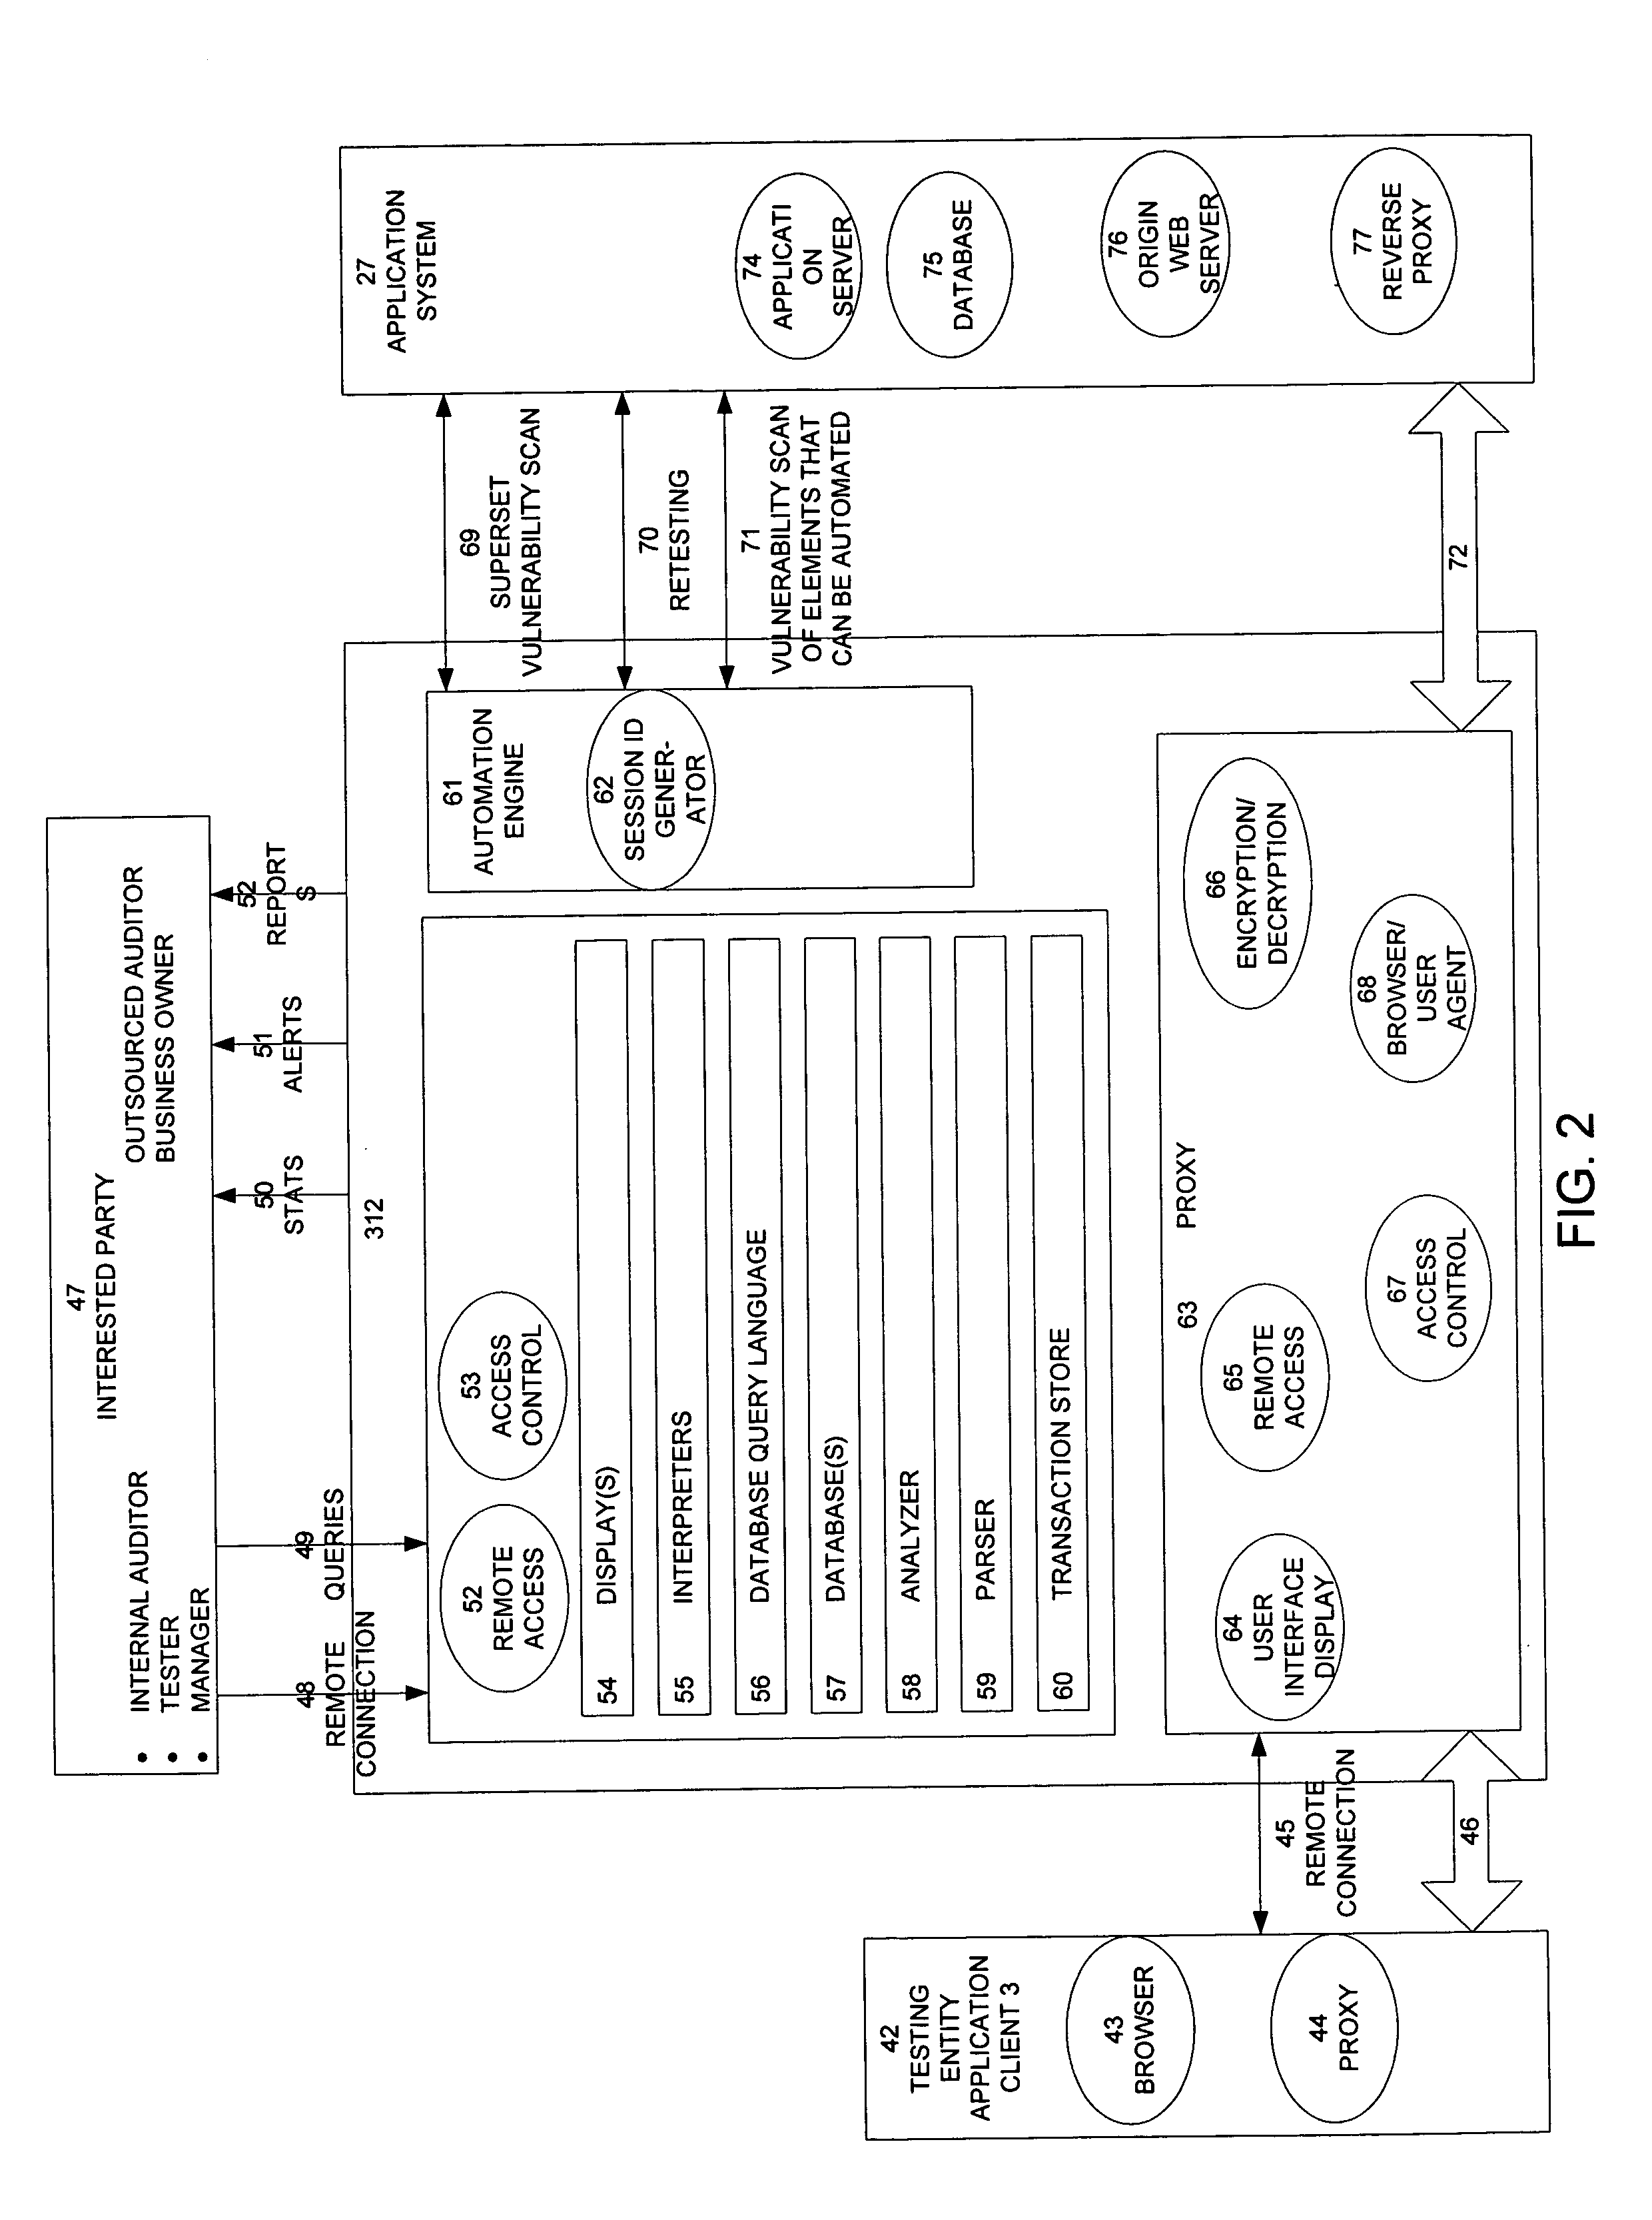 Method, system, and apparatus for managing, monitoring, auditing, cataloging, scoring, and improving vulnerability assessment tests, as well as automating retesting efforts and elements of tests